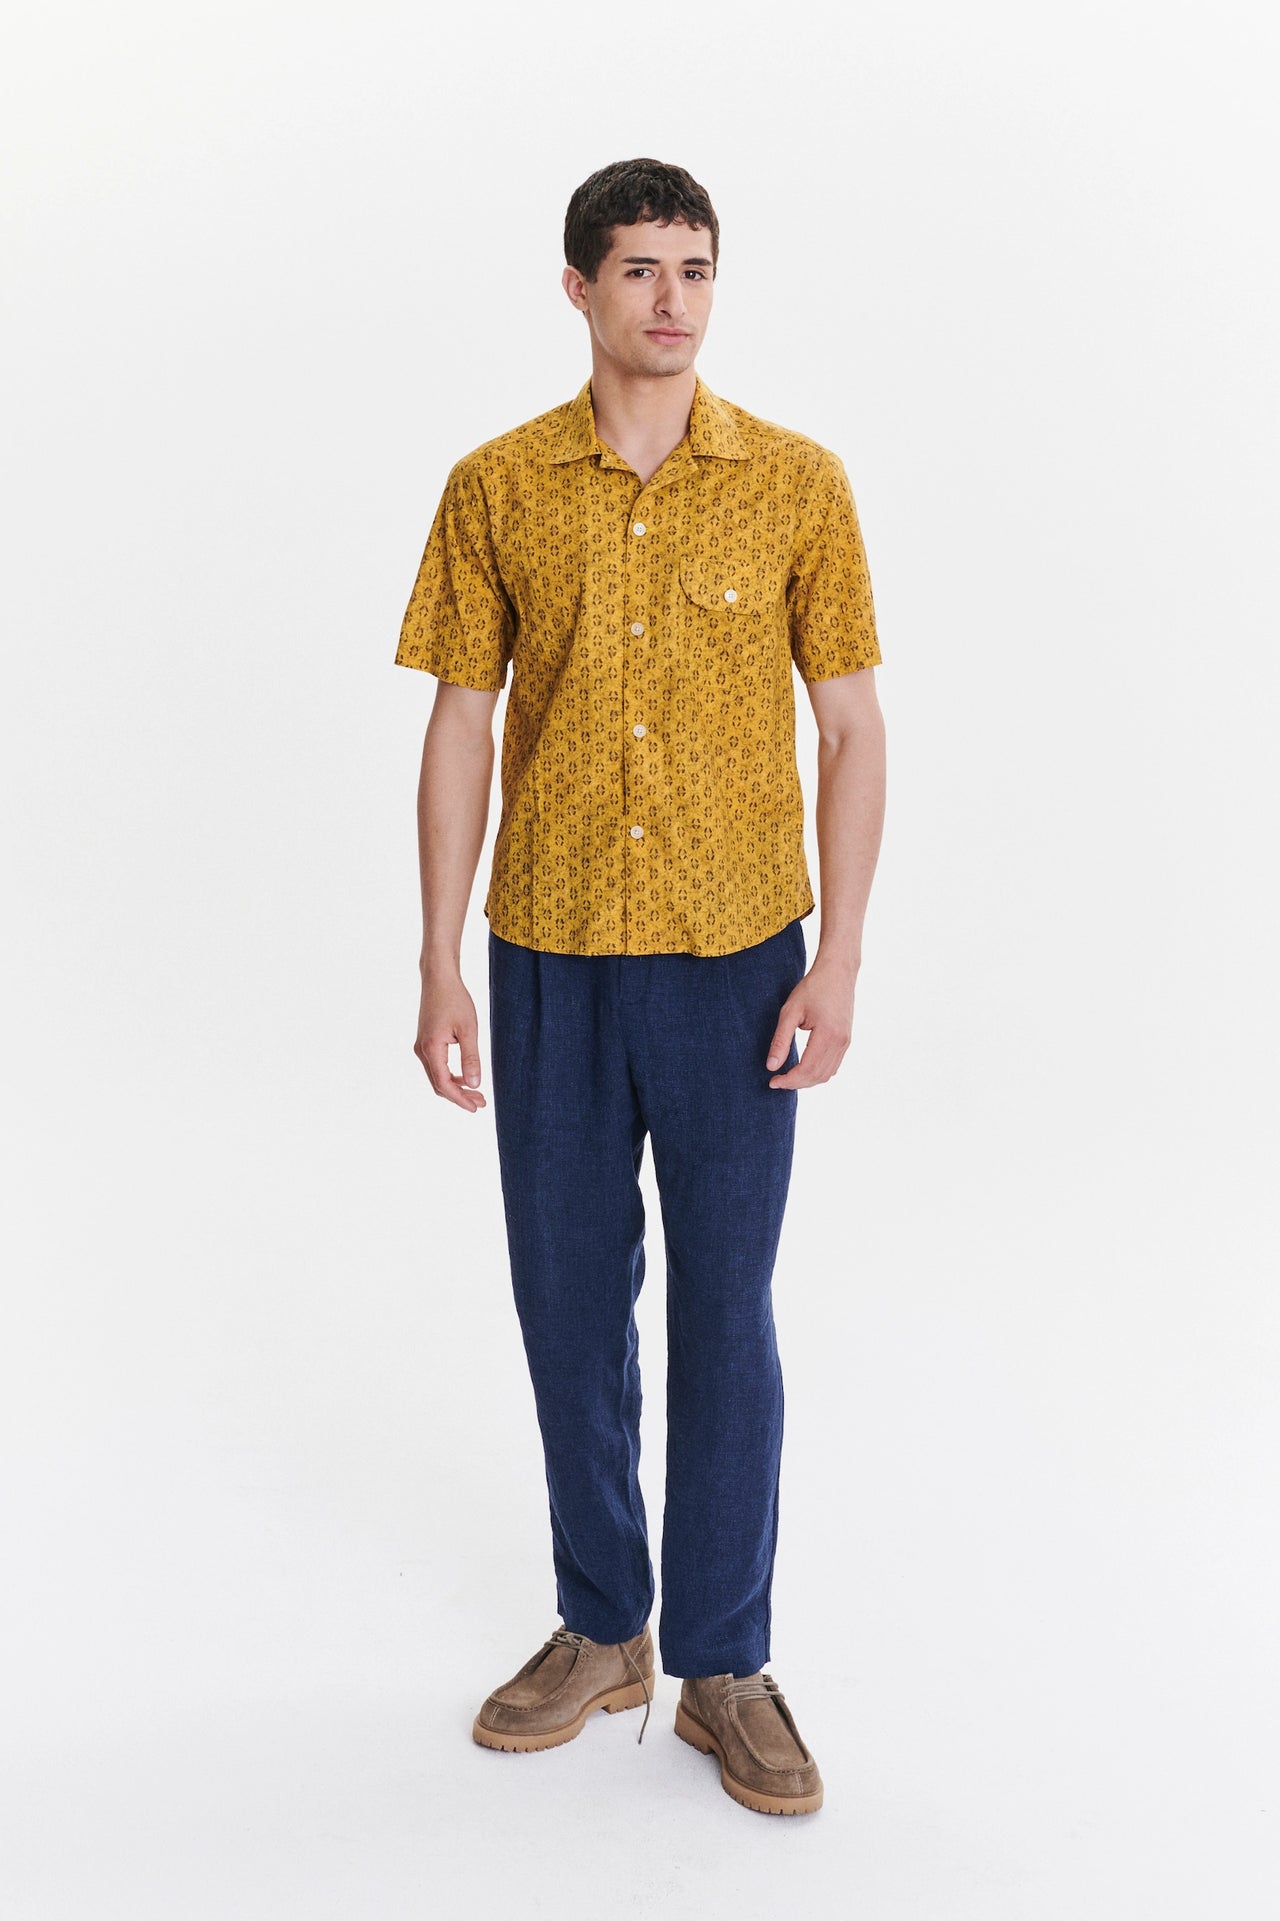 Short Sleeve Camp Collar Shirt in a Yellow and Sepia Brown Abstract Print Italian Cotton